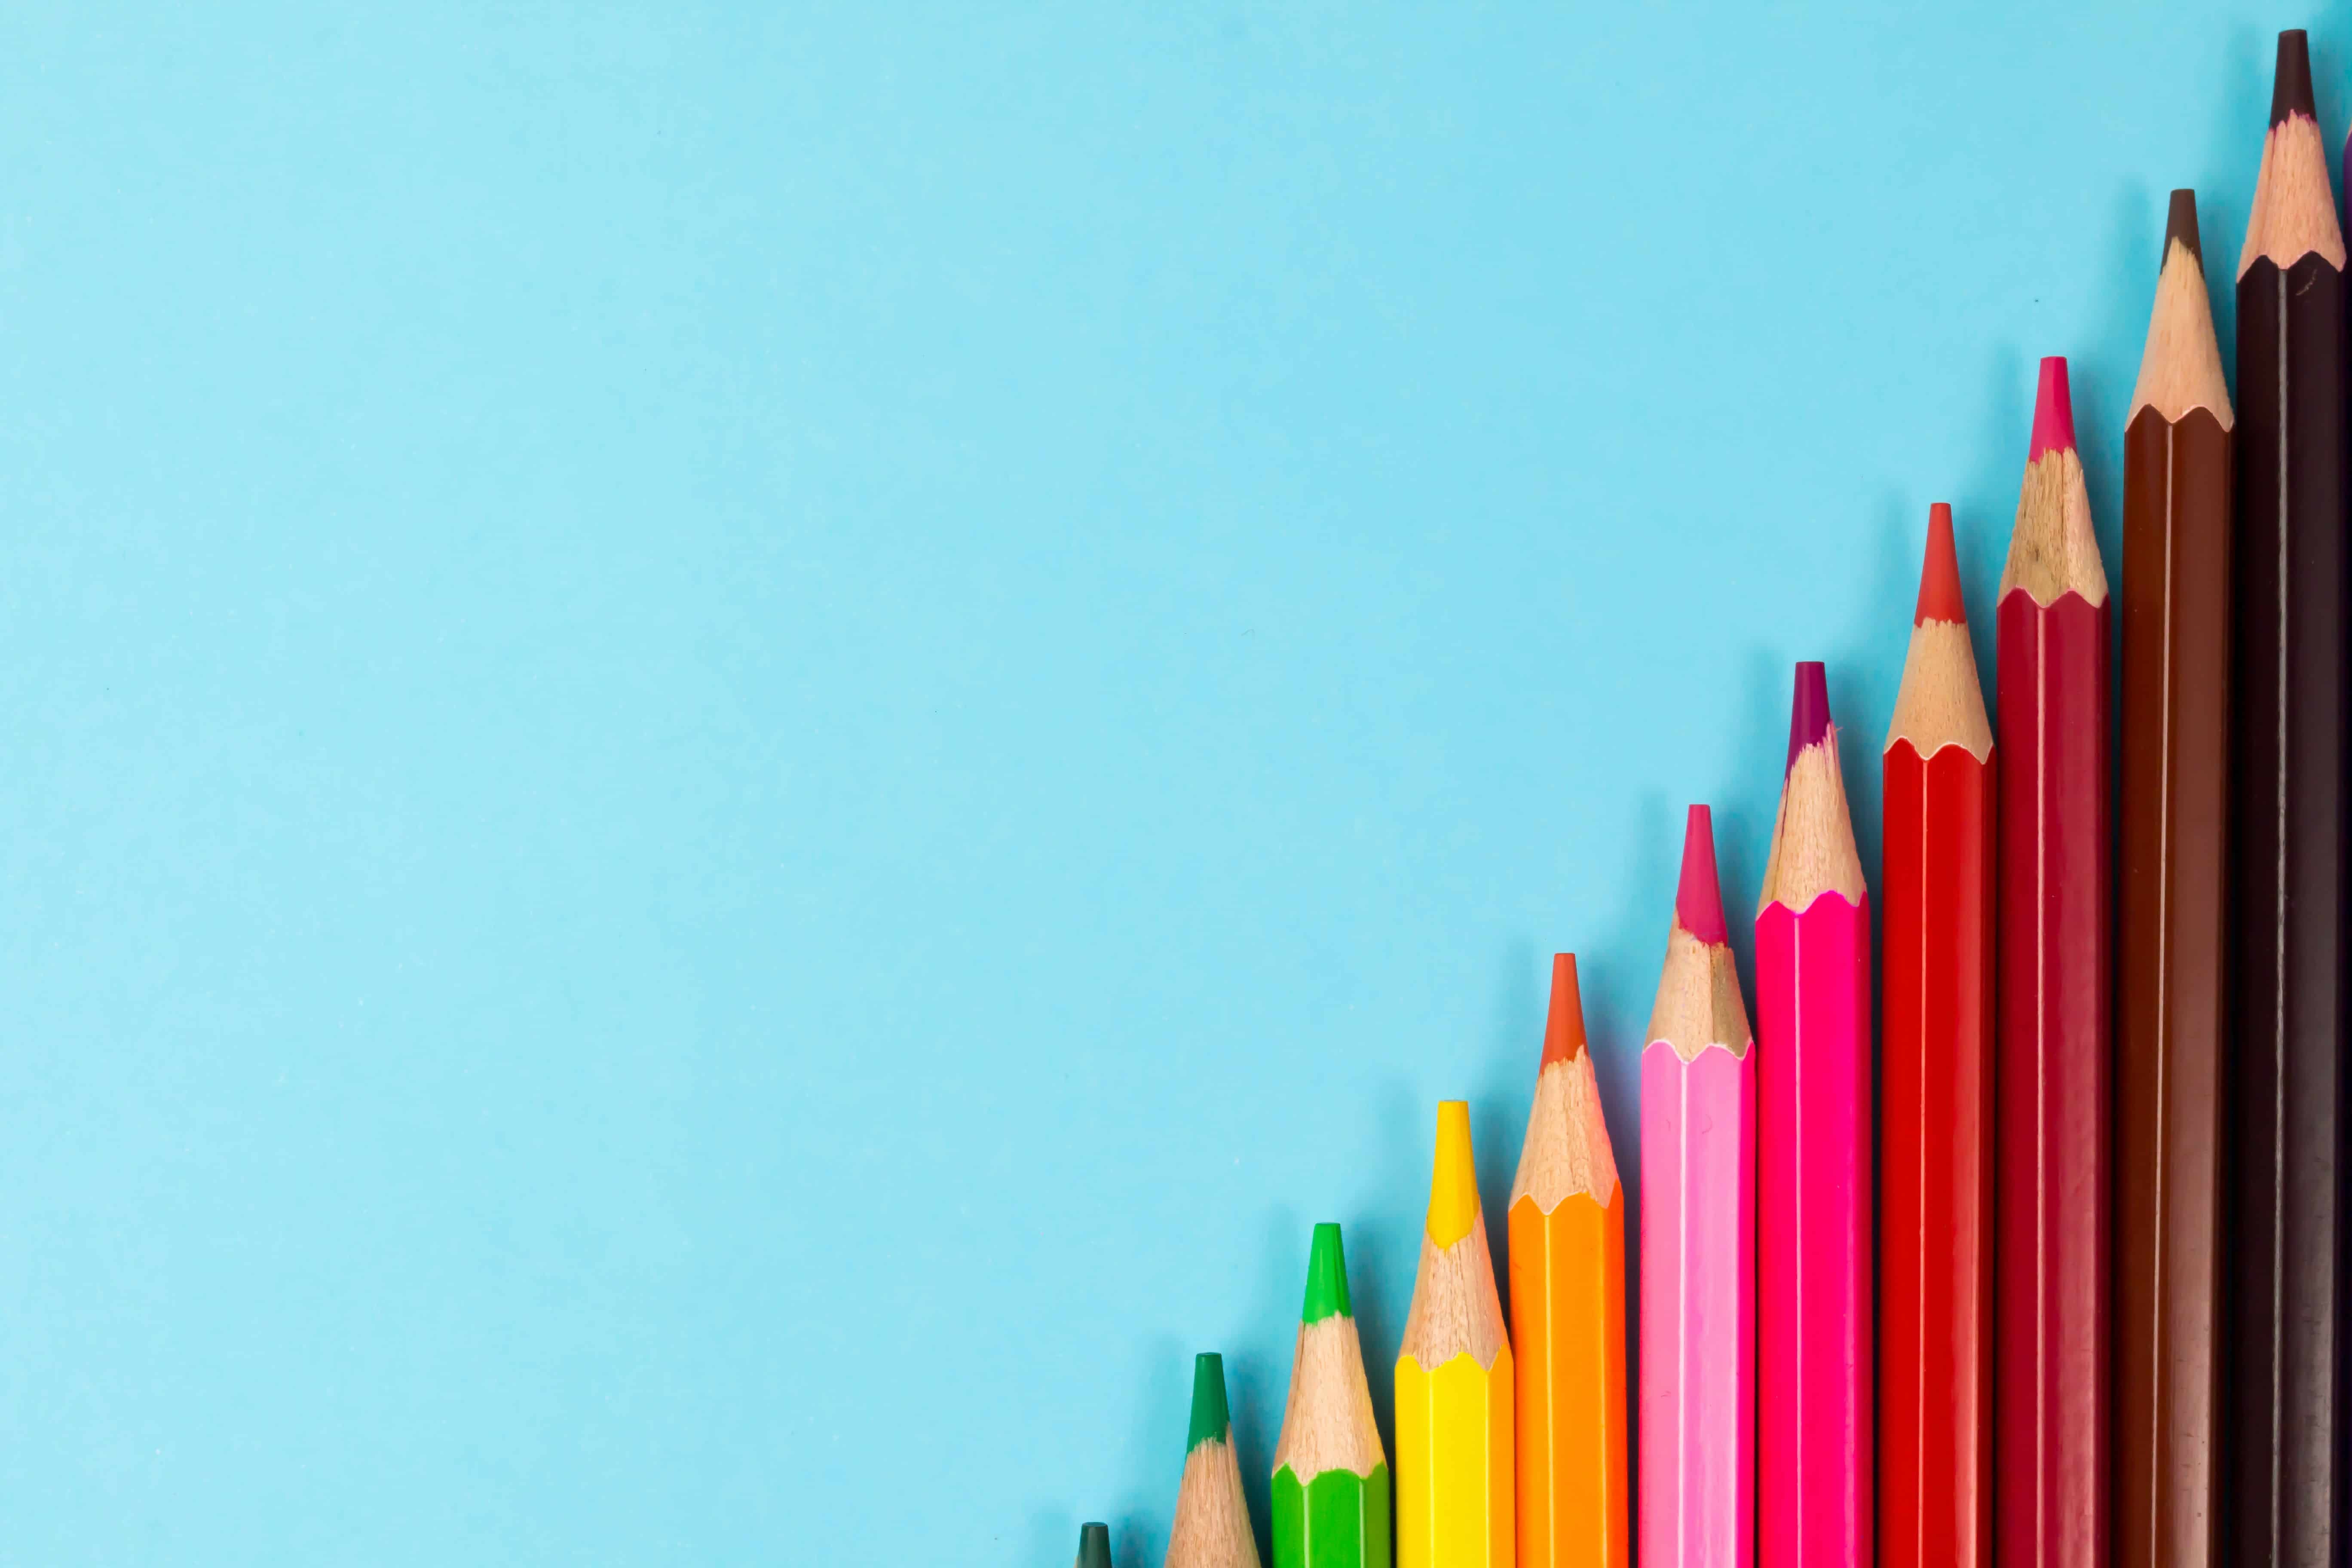 a row of colorful wooden pencils on a blue background for kids going back to school